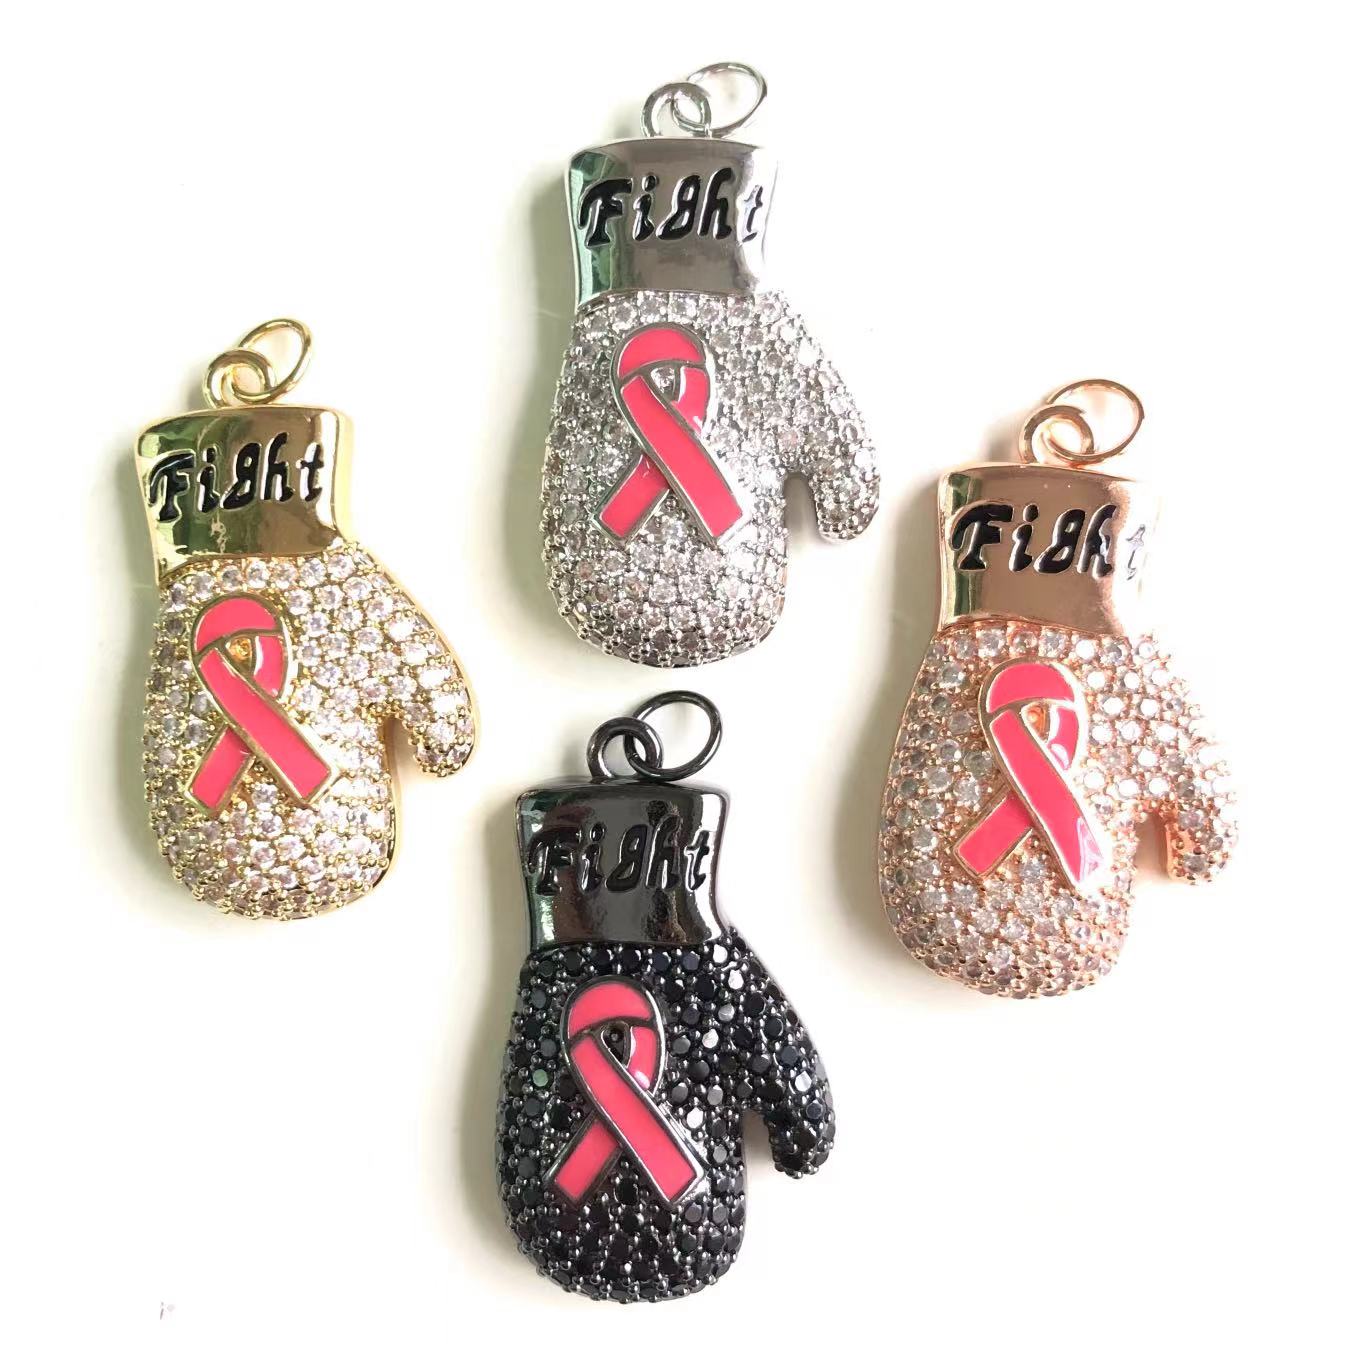 Breast Cancer: Heart Ribbon and Words embellishment pack